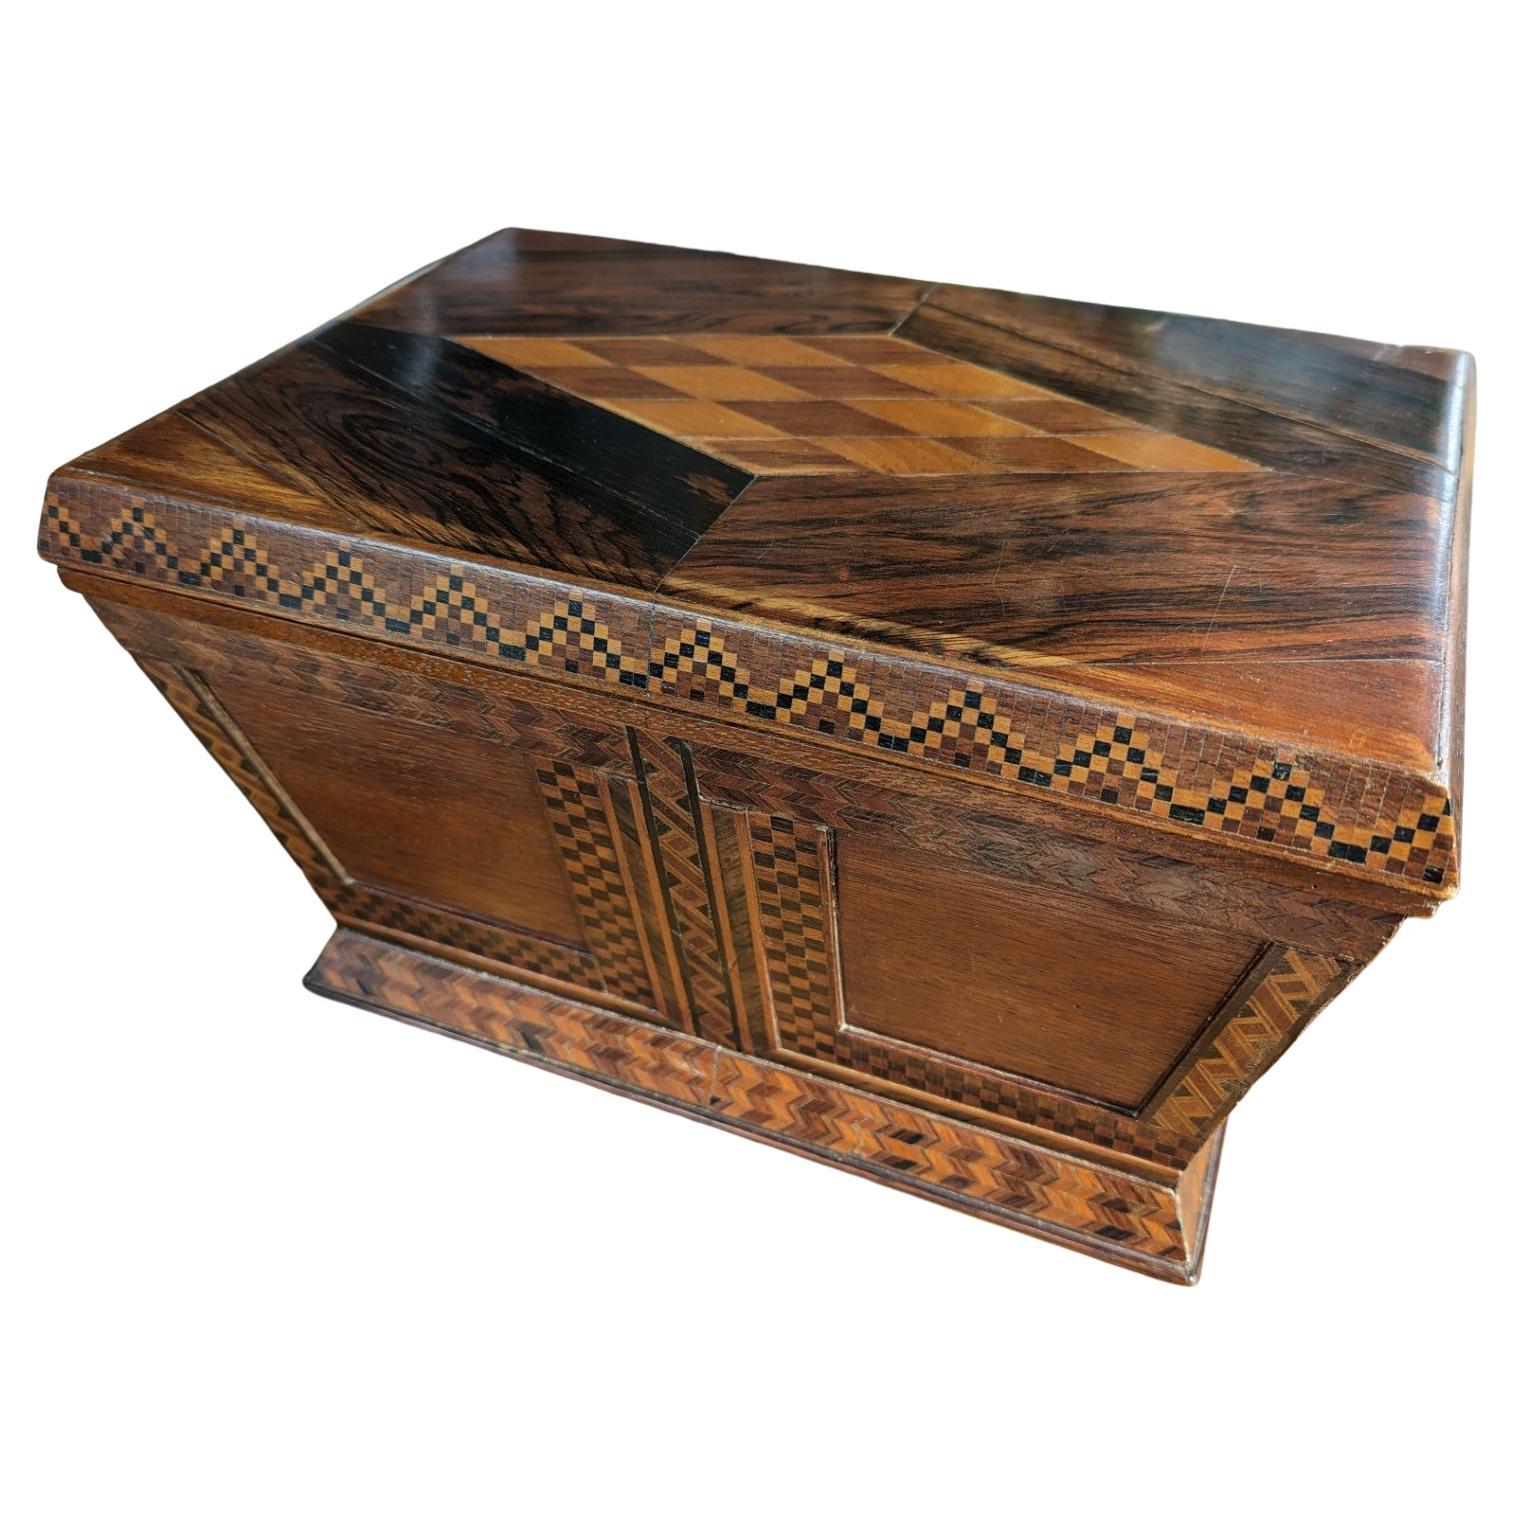 Antique Large Wood Marquetry Inlay Box with Decorative Checkered Design For Sale